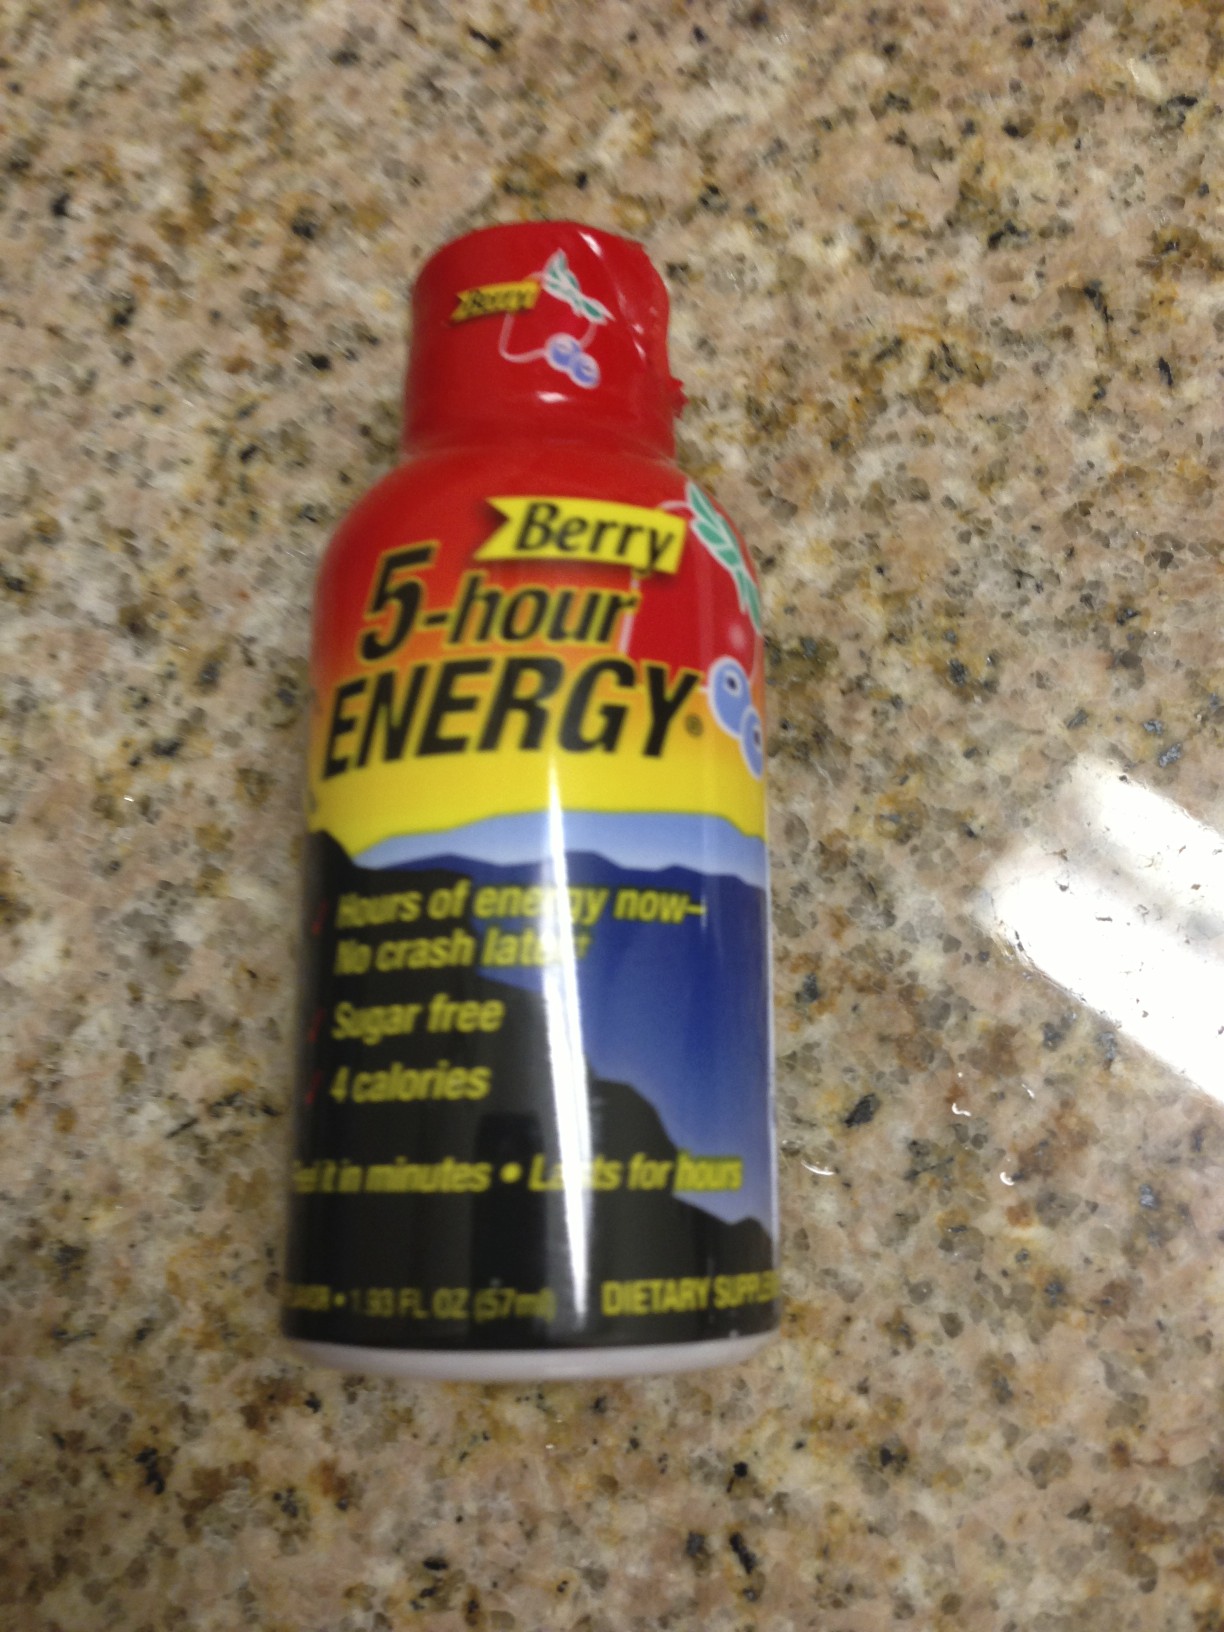 My first ever 5-hour Energy attempt.